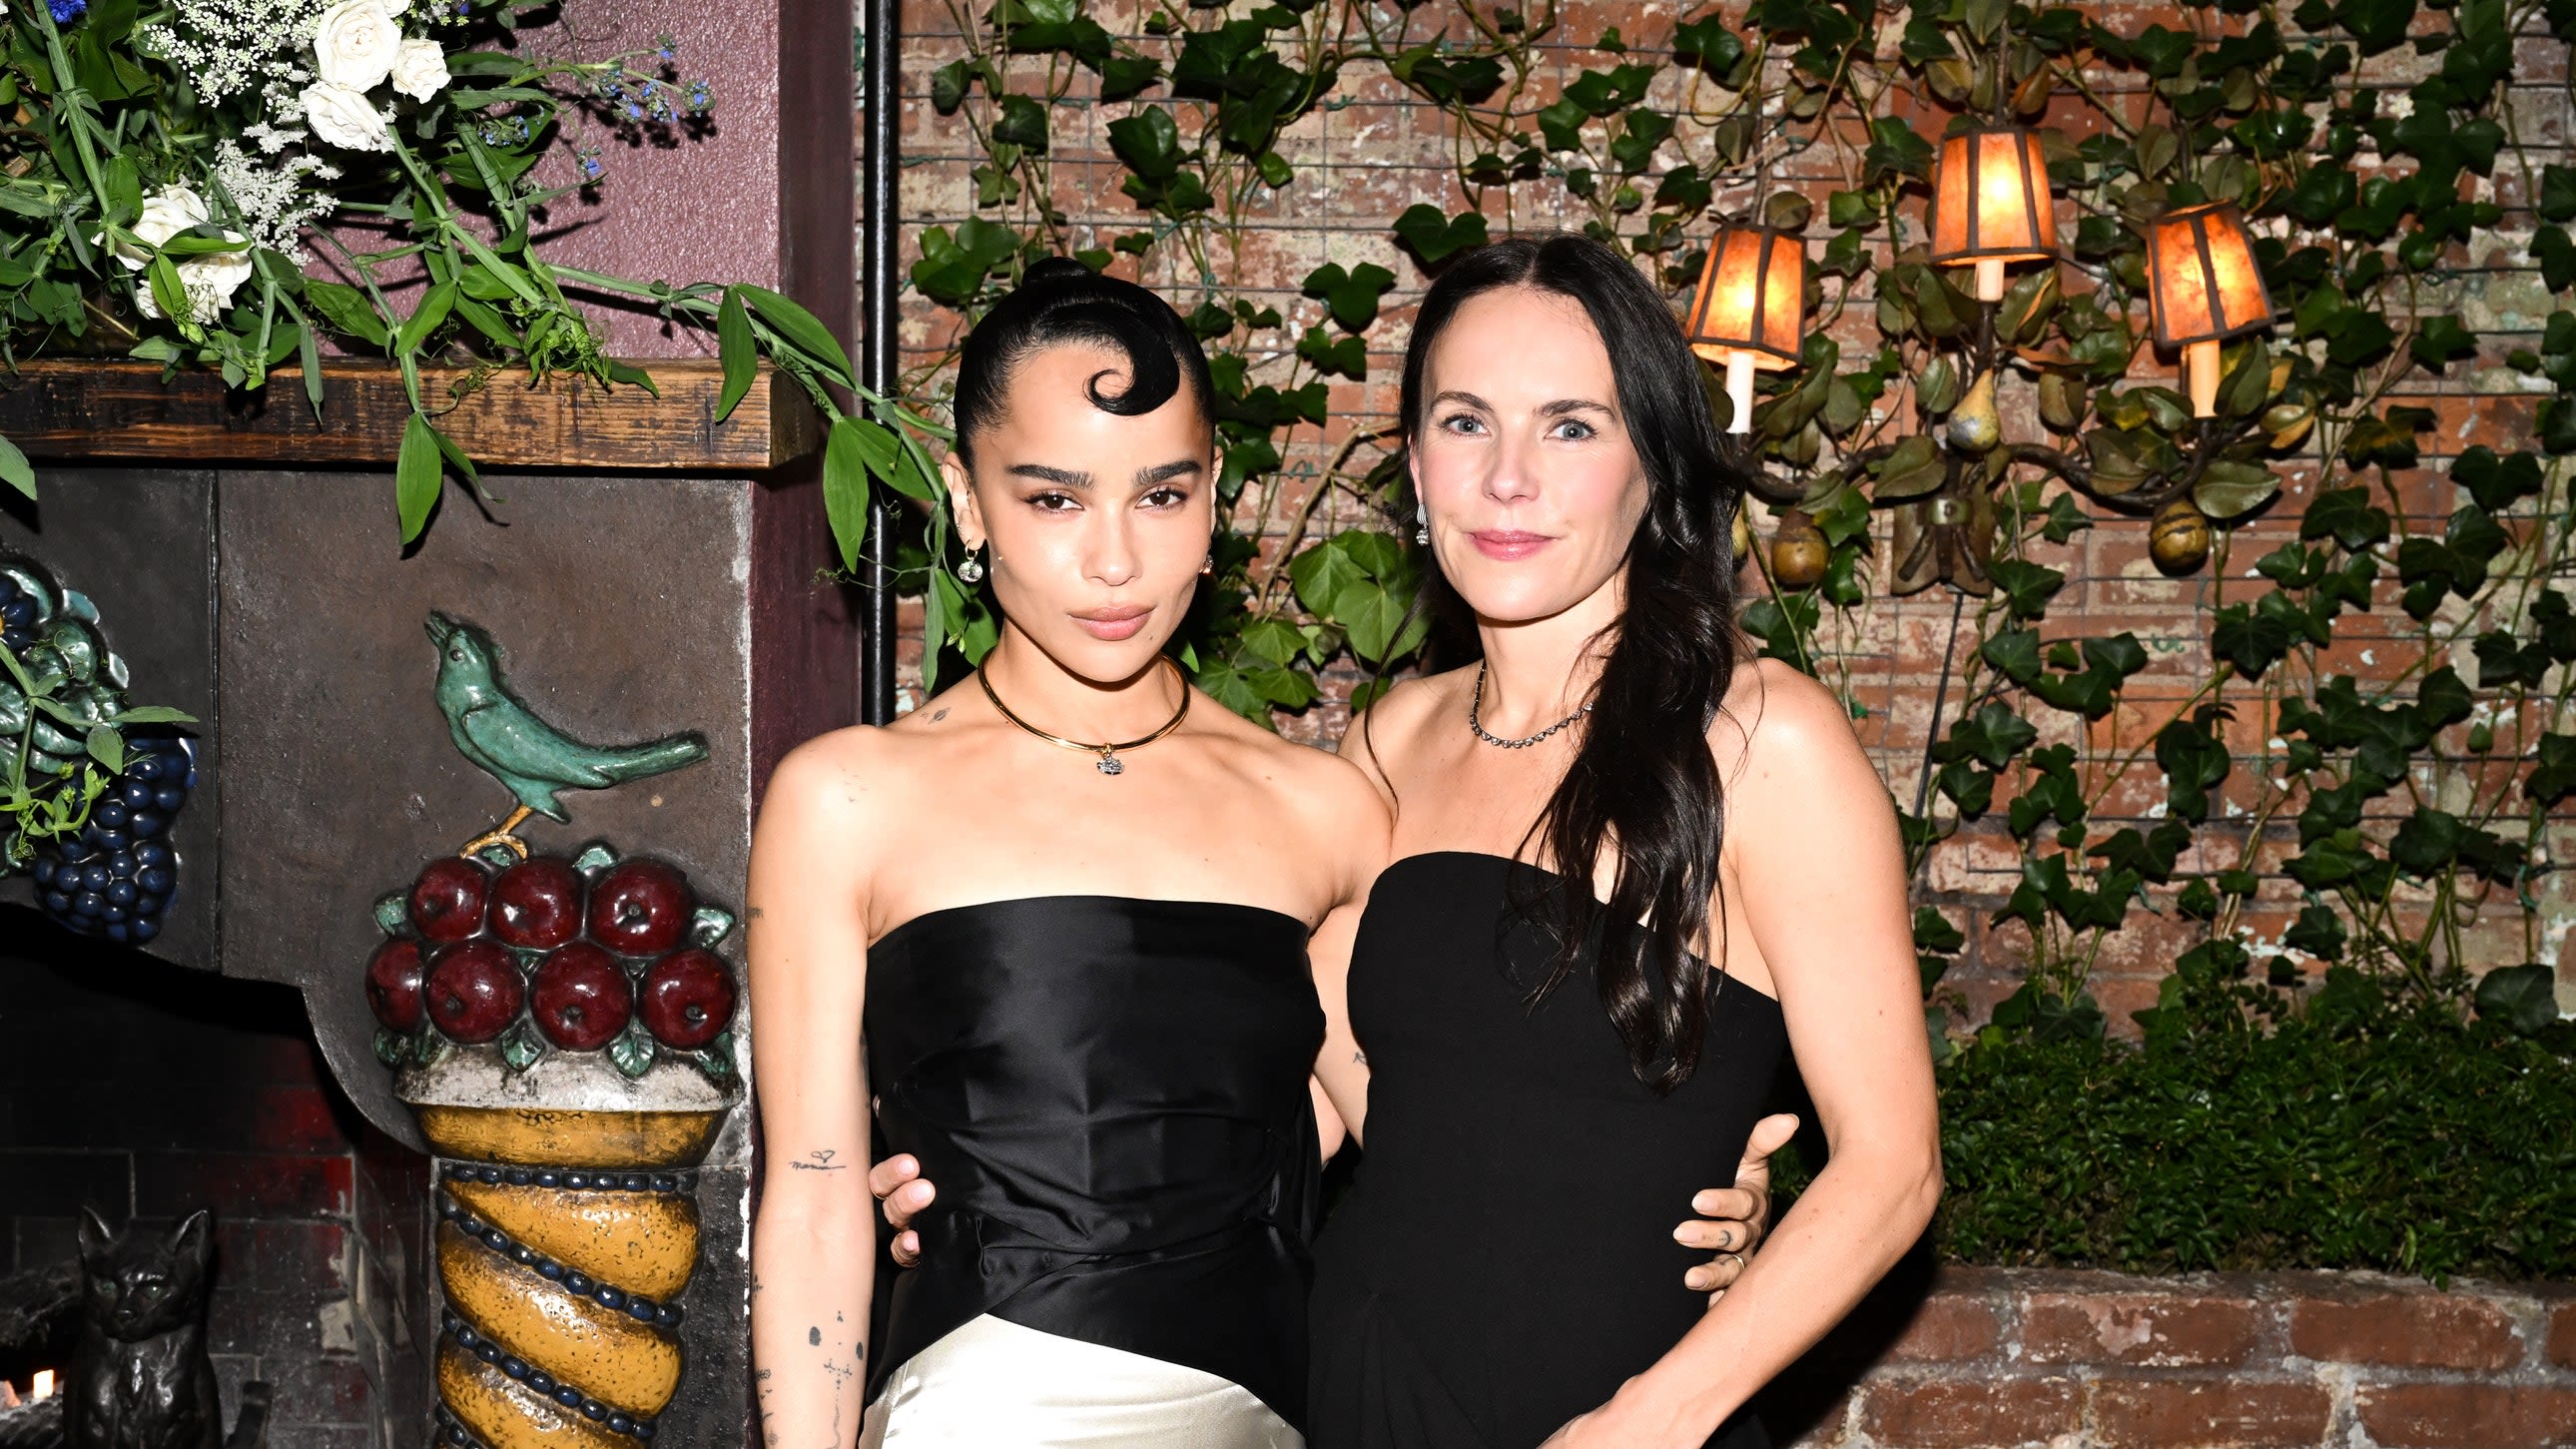 Zoë Kravitz and Jessica McCormack Hosted a Dinner at The Waverly Inn to Celebrate Their Partnership